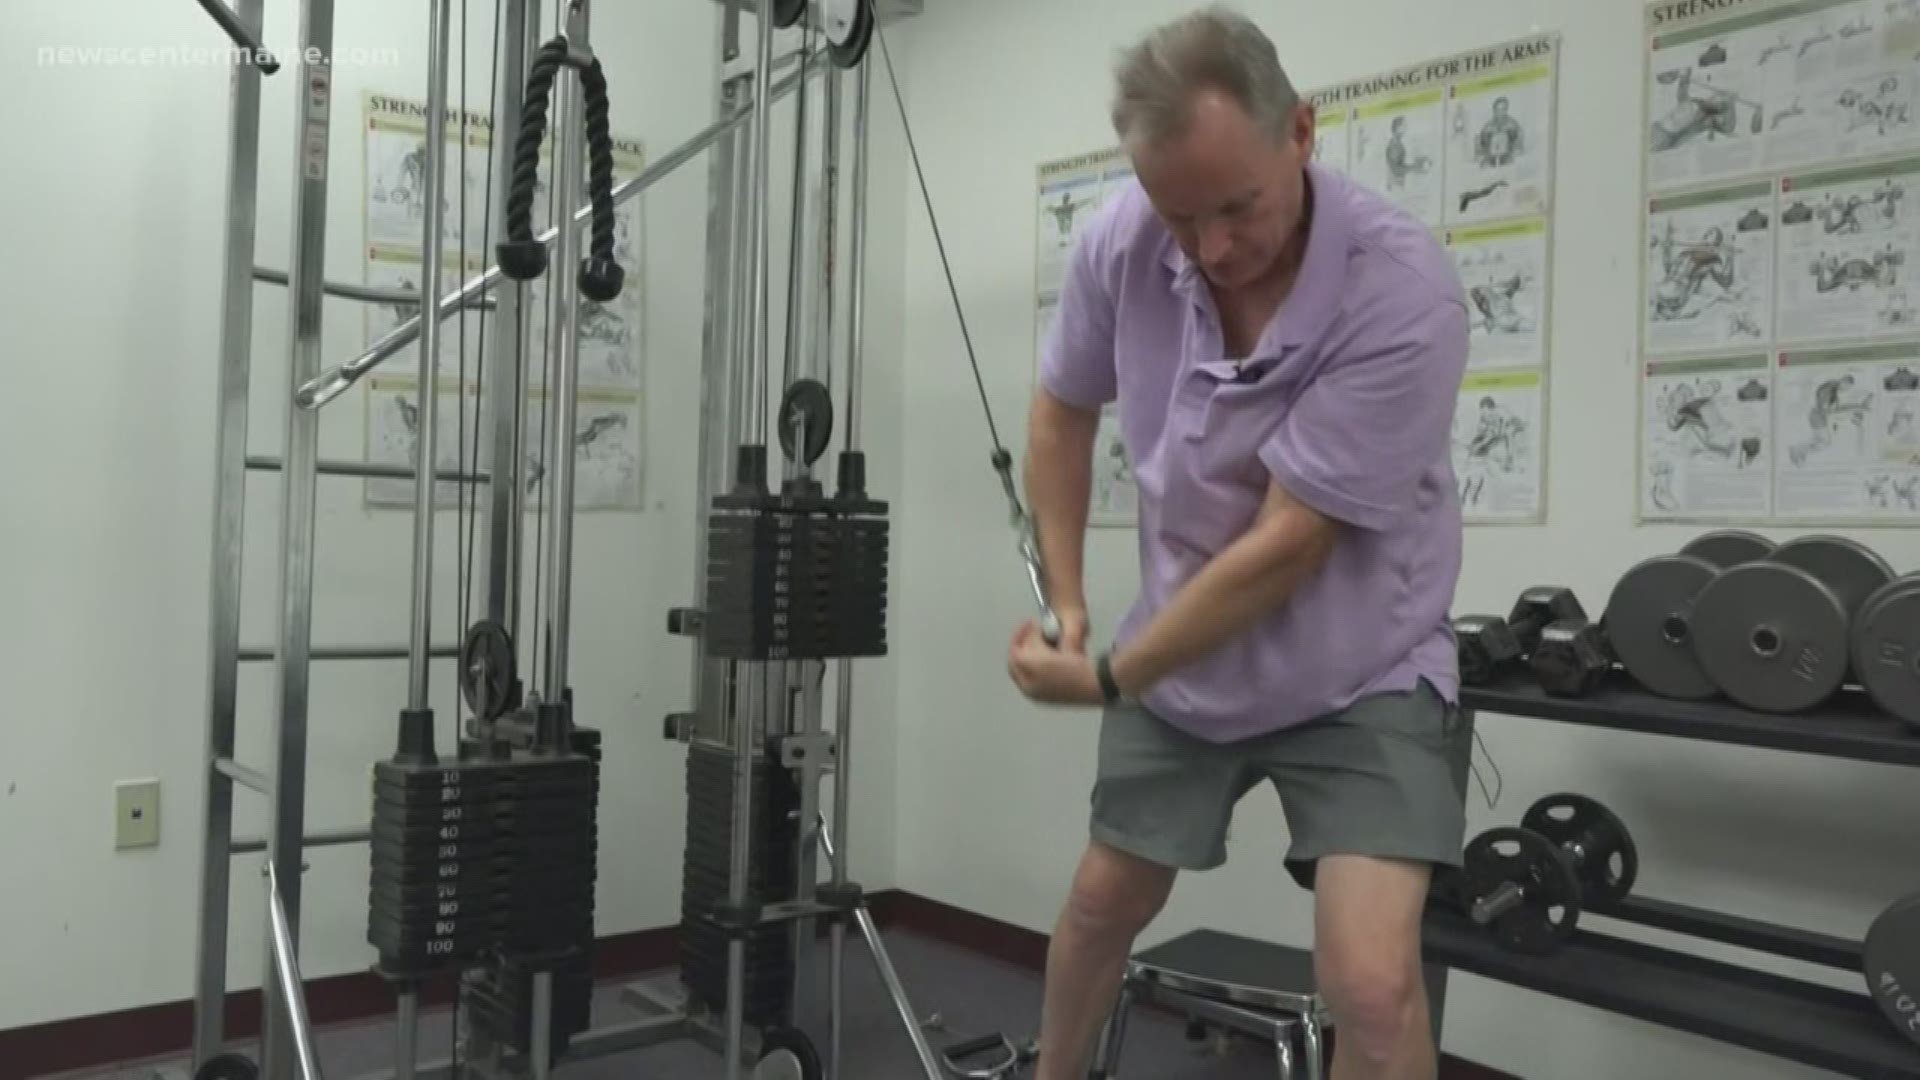 61-year-old Alan Dill writes poems and songs as part of his motivation towards weight loss.